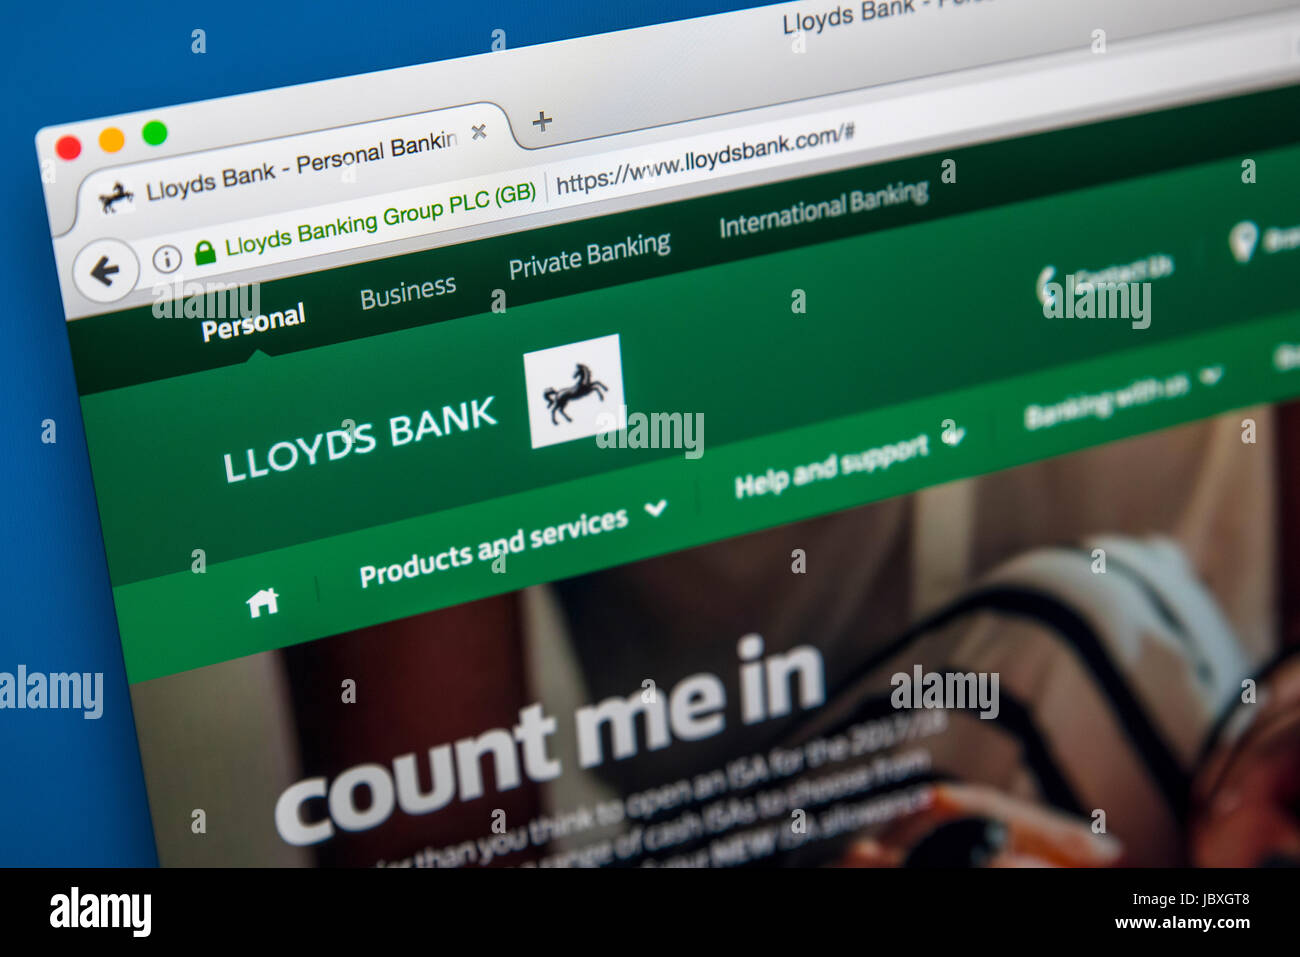 LONDON, UK - JUNE 8TH 2017: The homepage of the official website for Lloyds Bank, on 8th June 2017. Stock Photo